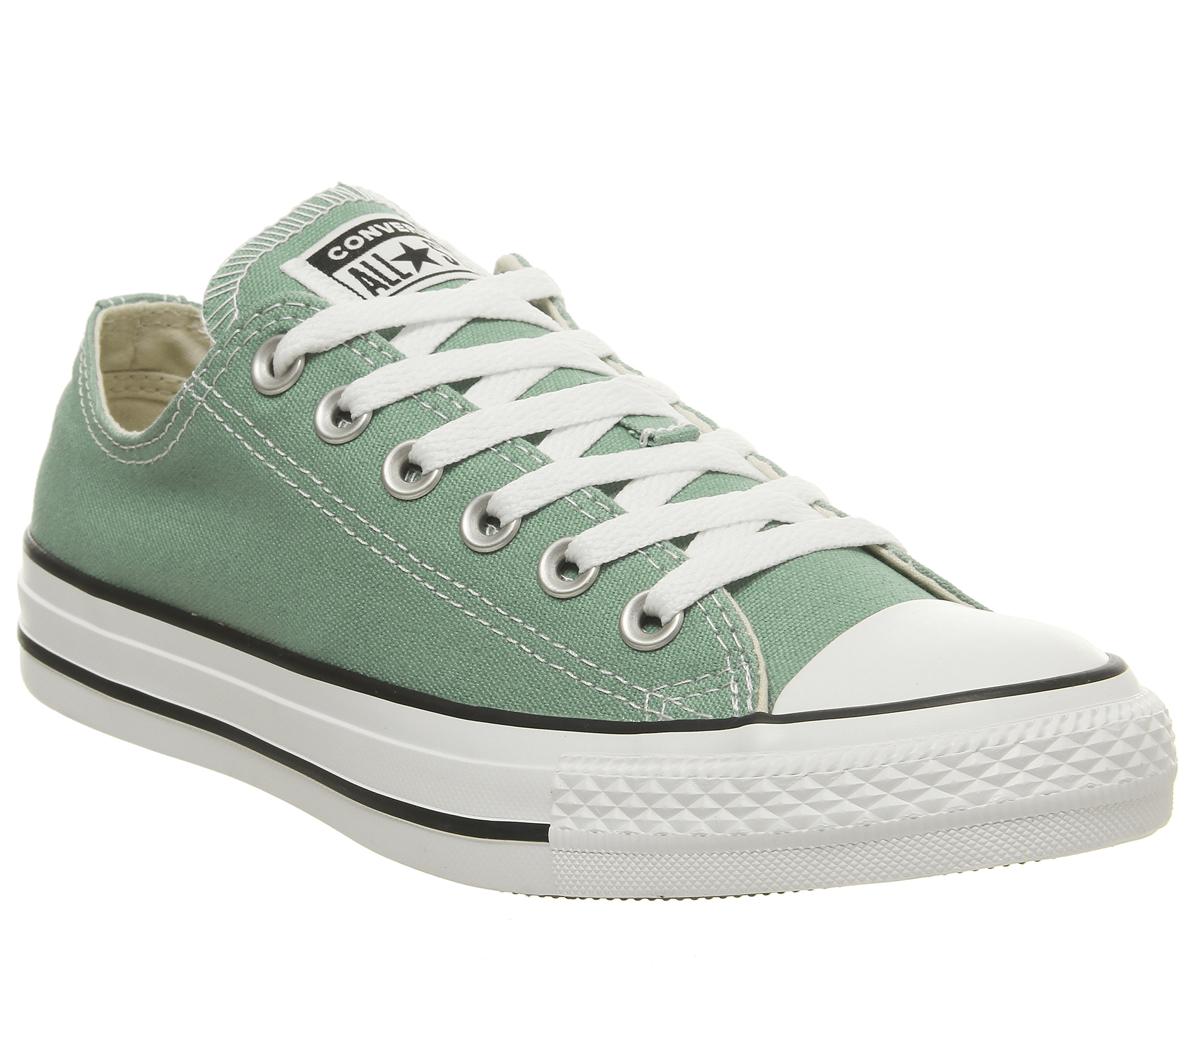 Converse Converse All Trainers Mineral Teal Women's Trainers